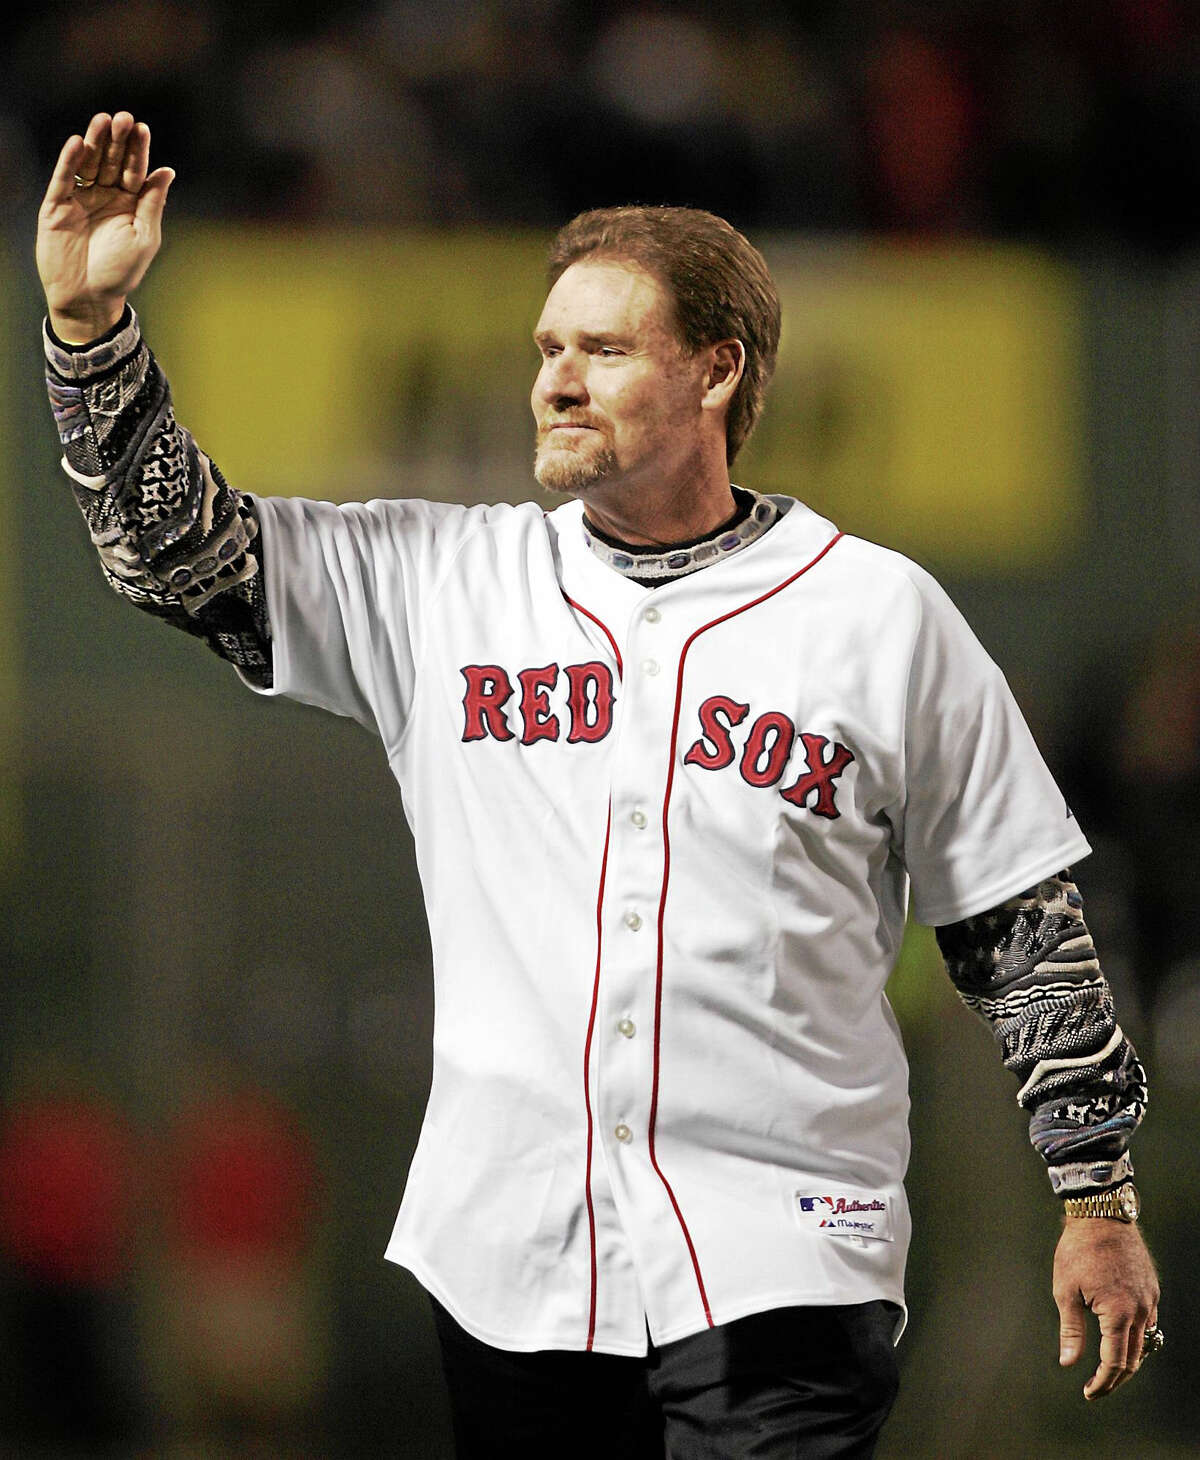 The Boston Red Sox announced on Monday that the team will retire Wade Boggs’ No. 26 during a ceremony at Fenway park on May 26.